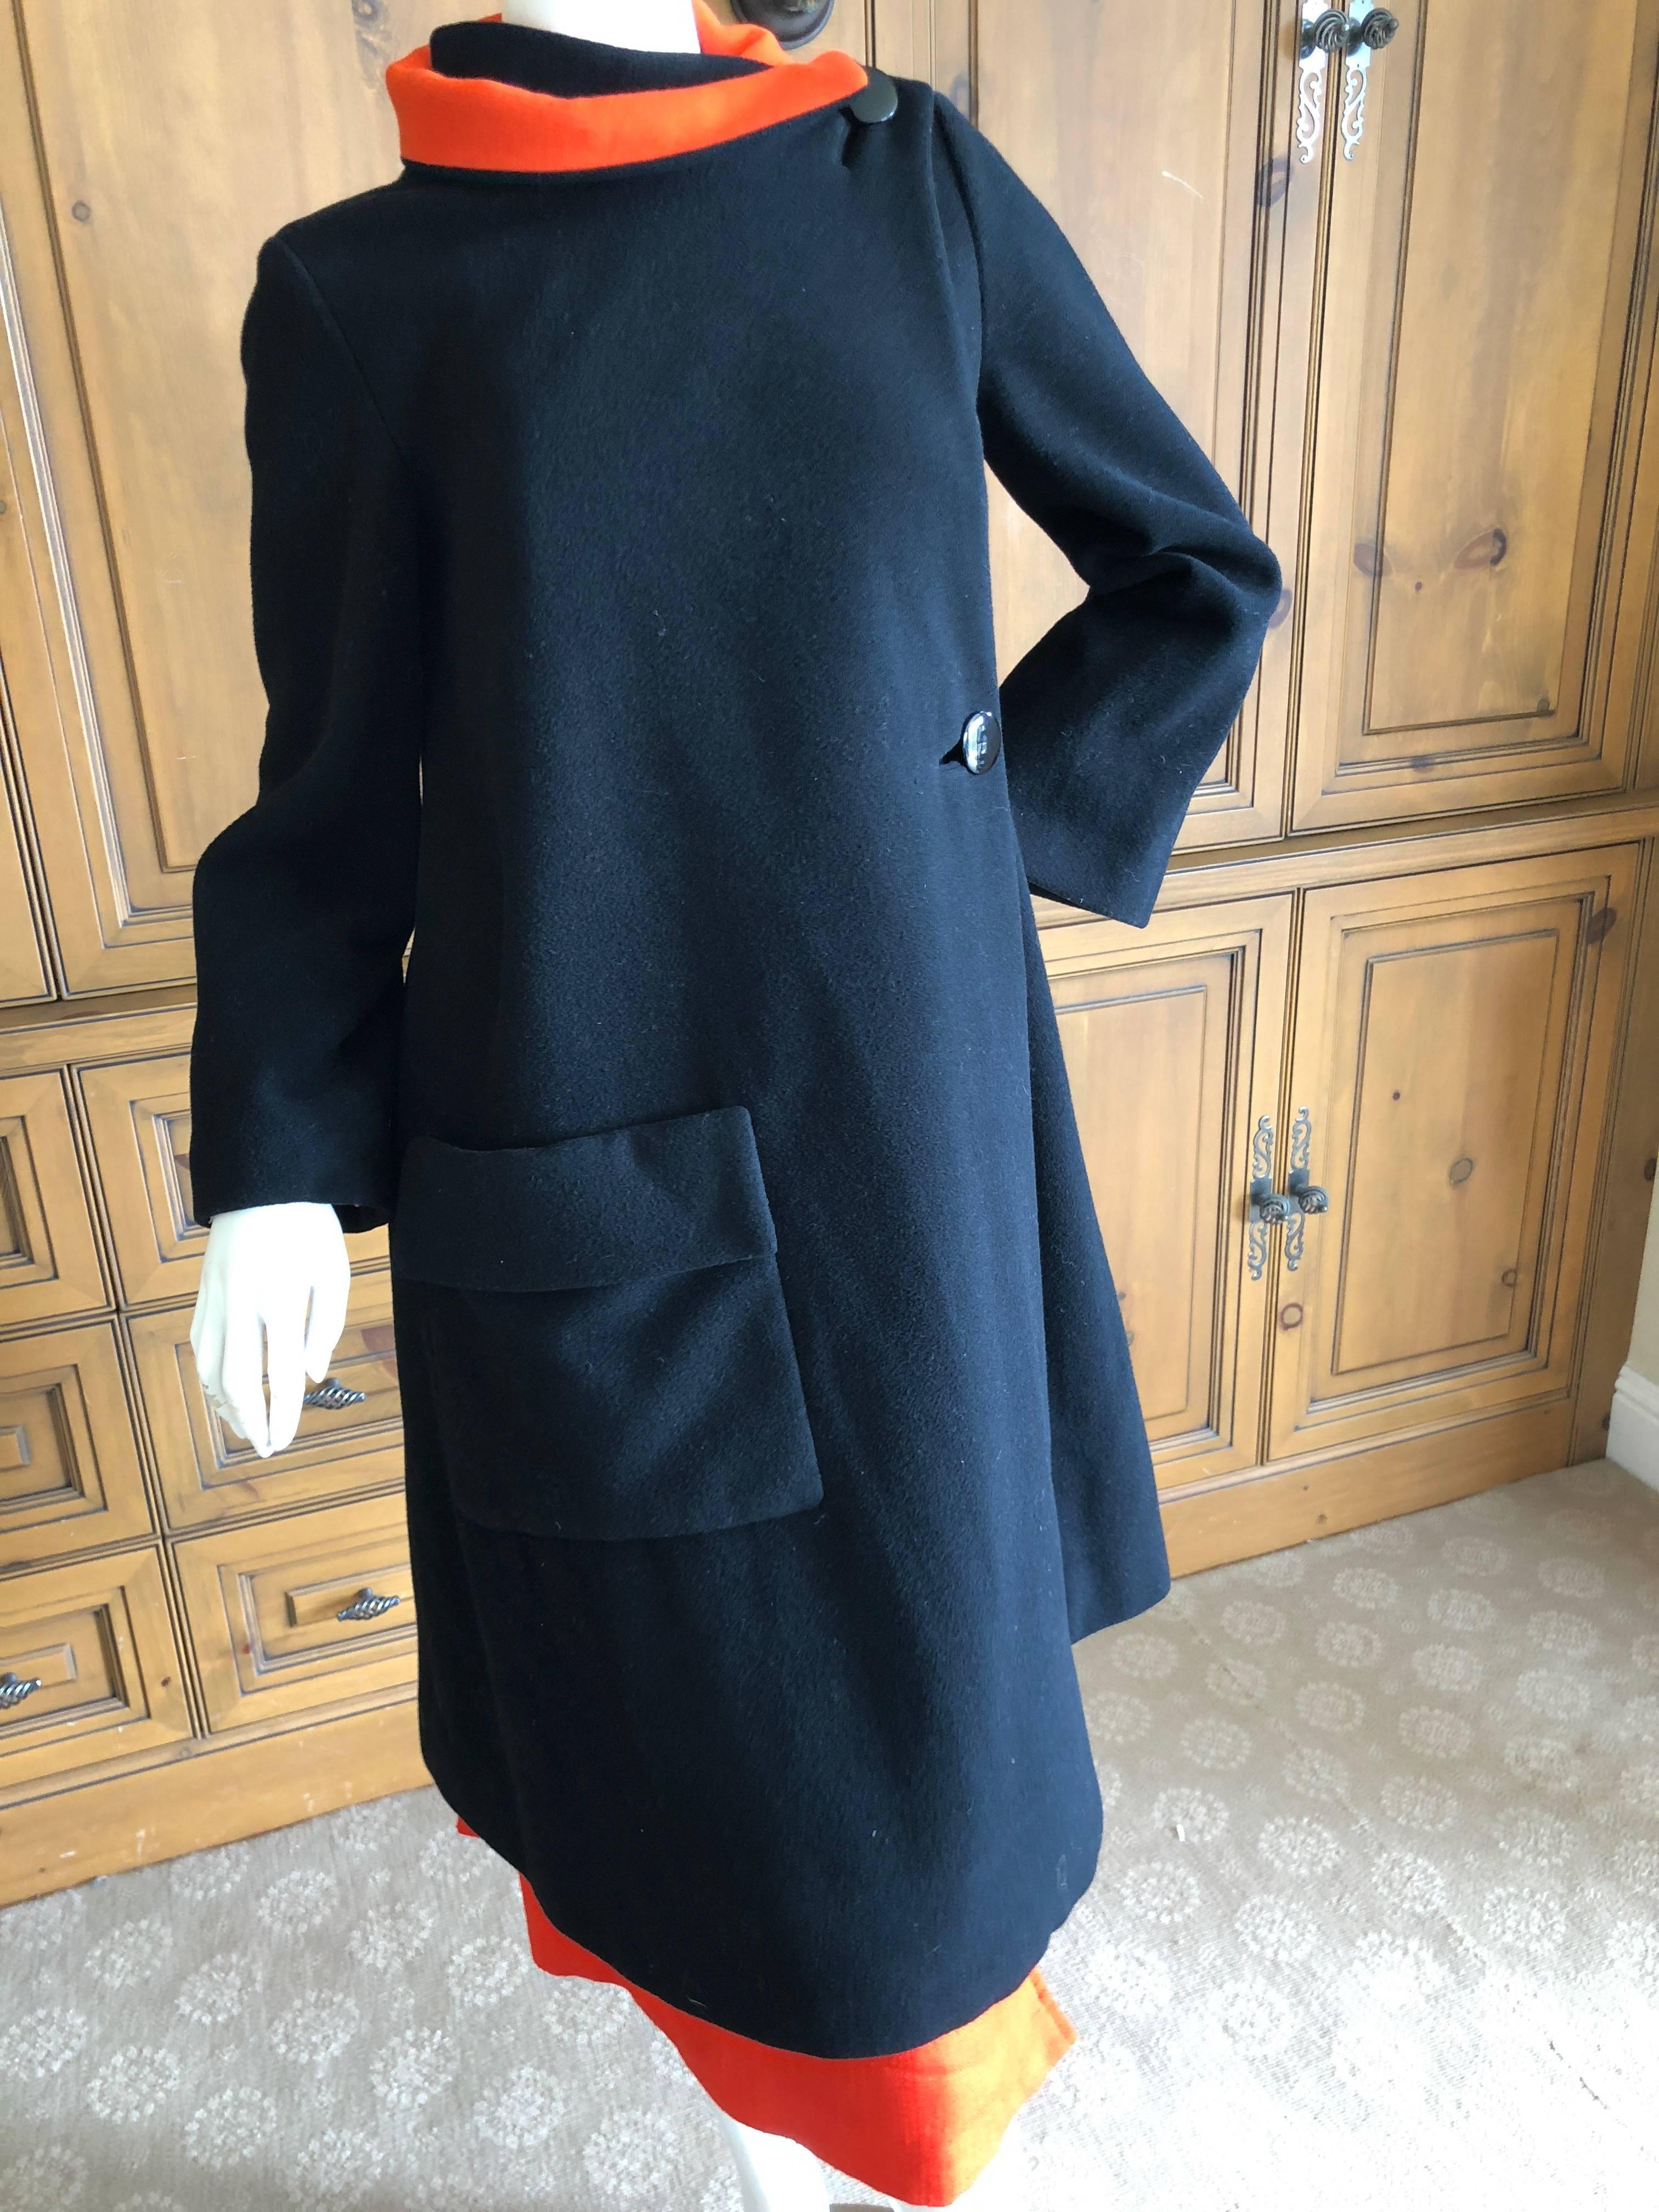 Cardinali 1970 Black Wool Coat with Orange Lining and Matching Skirt For Sale 2